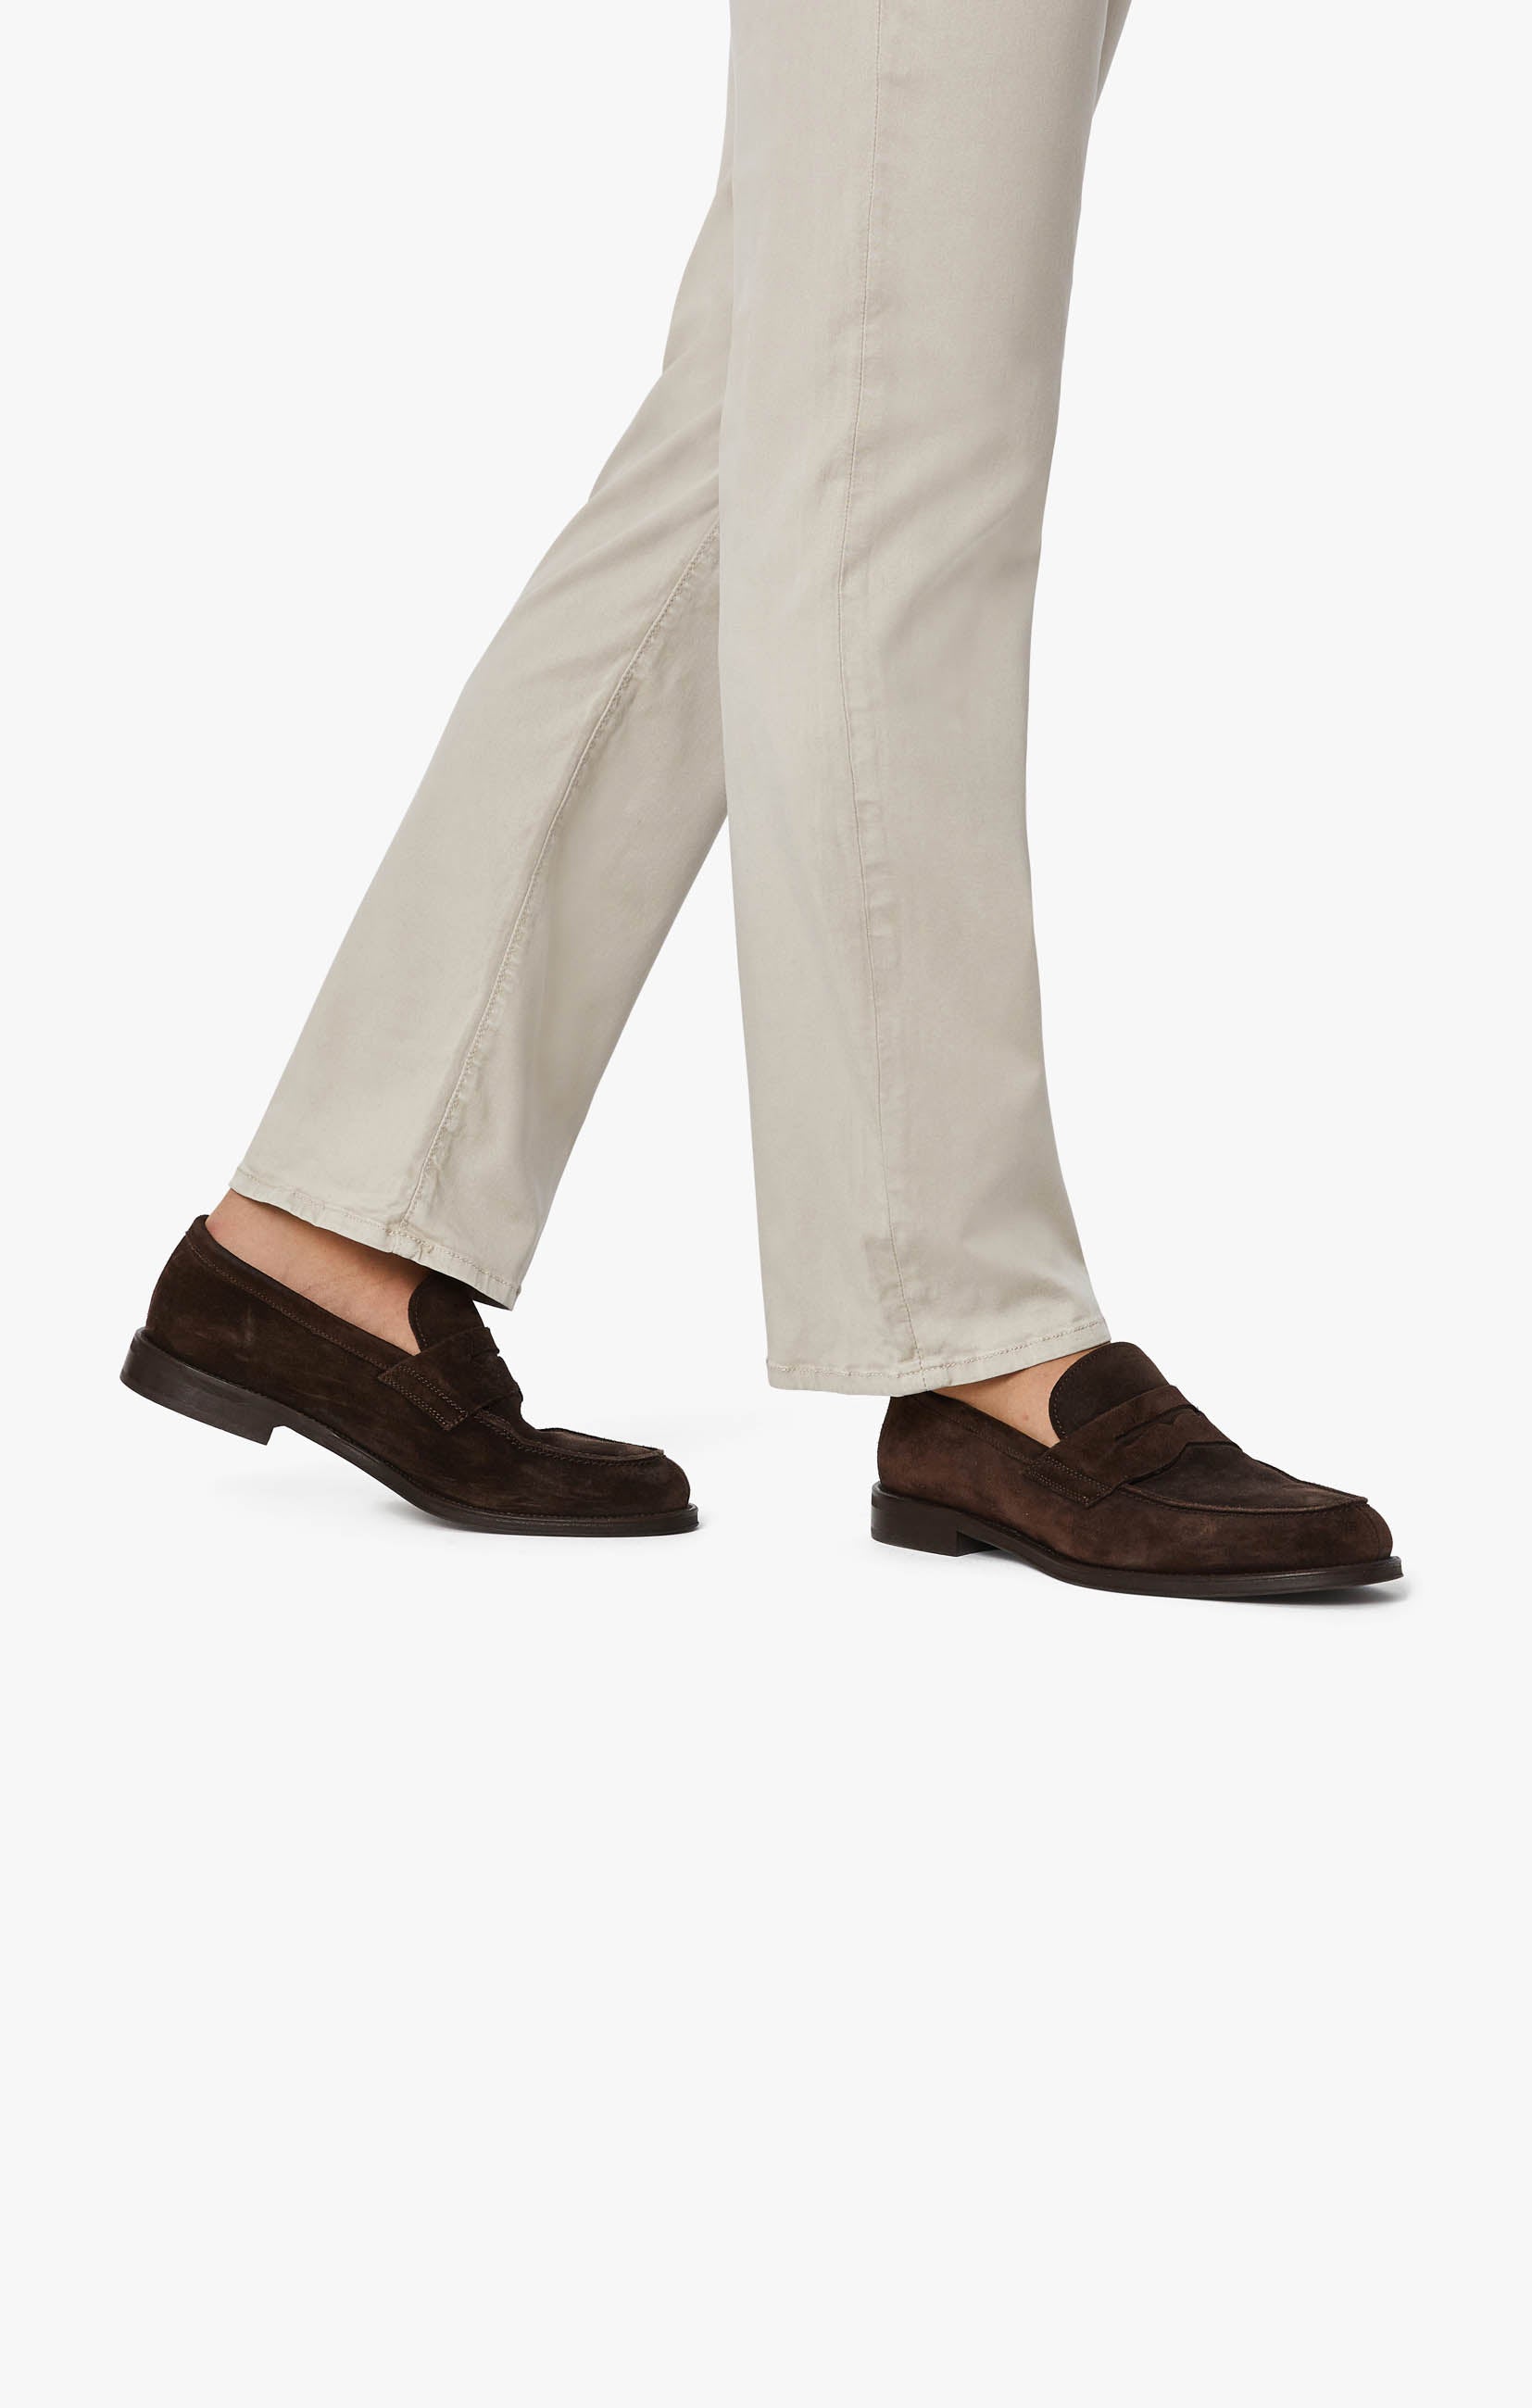 Charisma Relaxed Straight Leg Pants in Dawn Twill Image 9